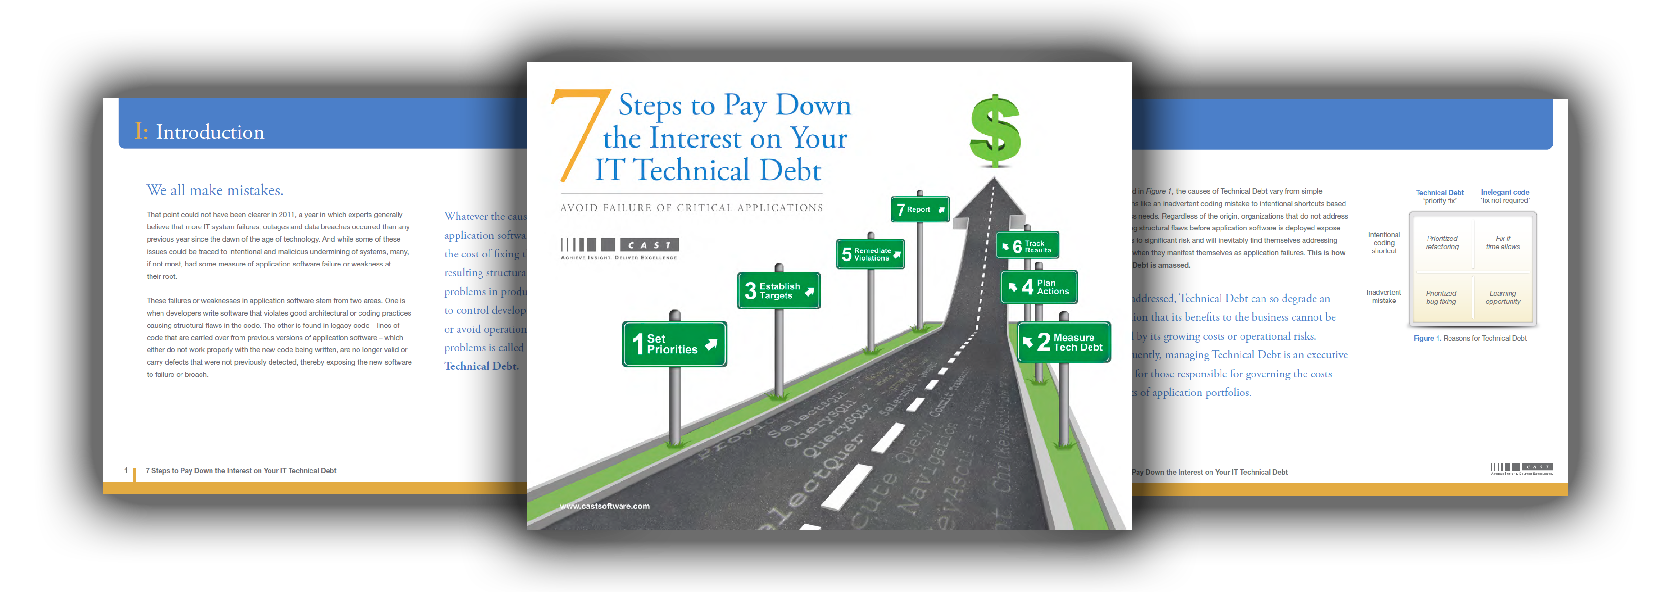 7 Steps To Pay Down The Interest On Your IT Technical Debt: Avoid Failure Of Critical Applications